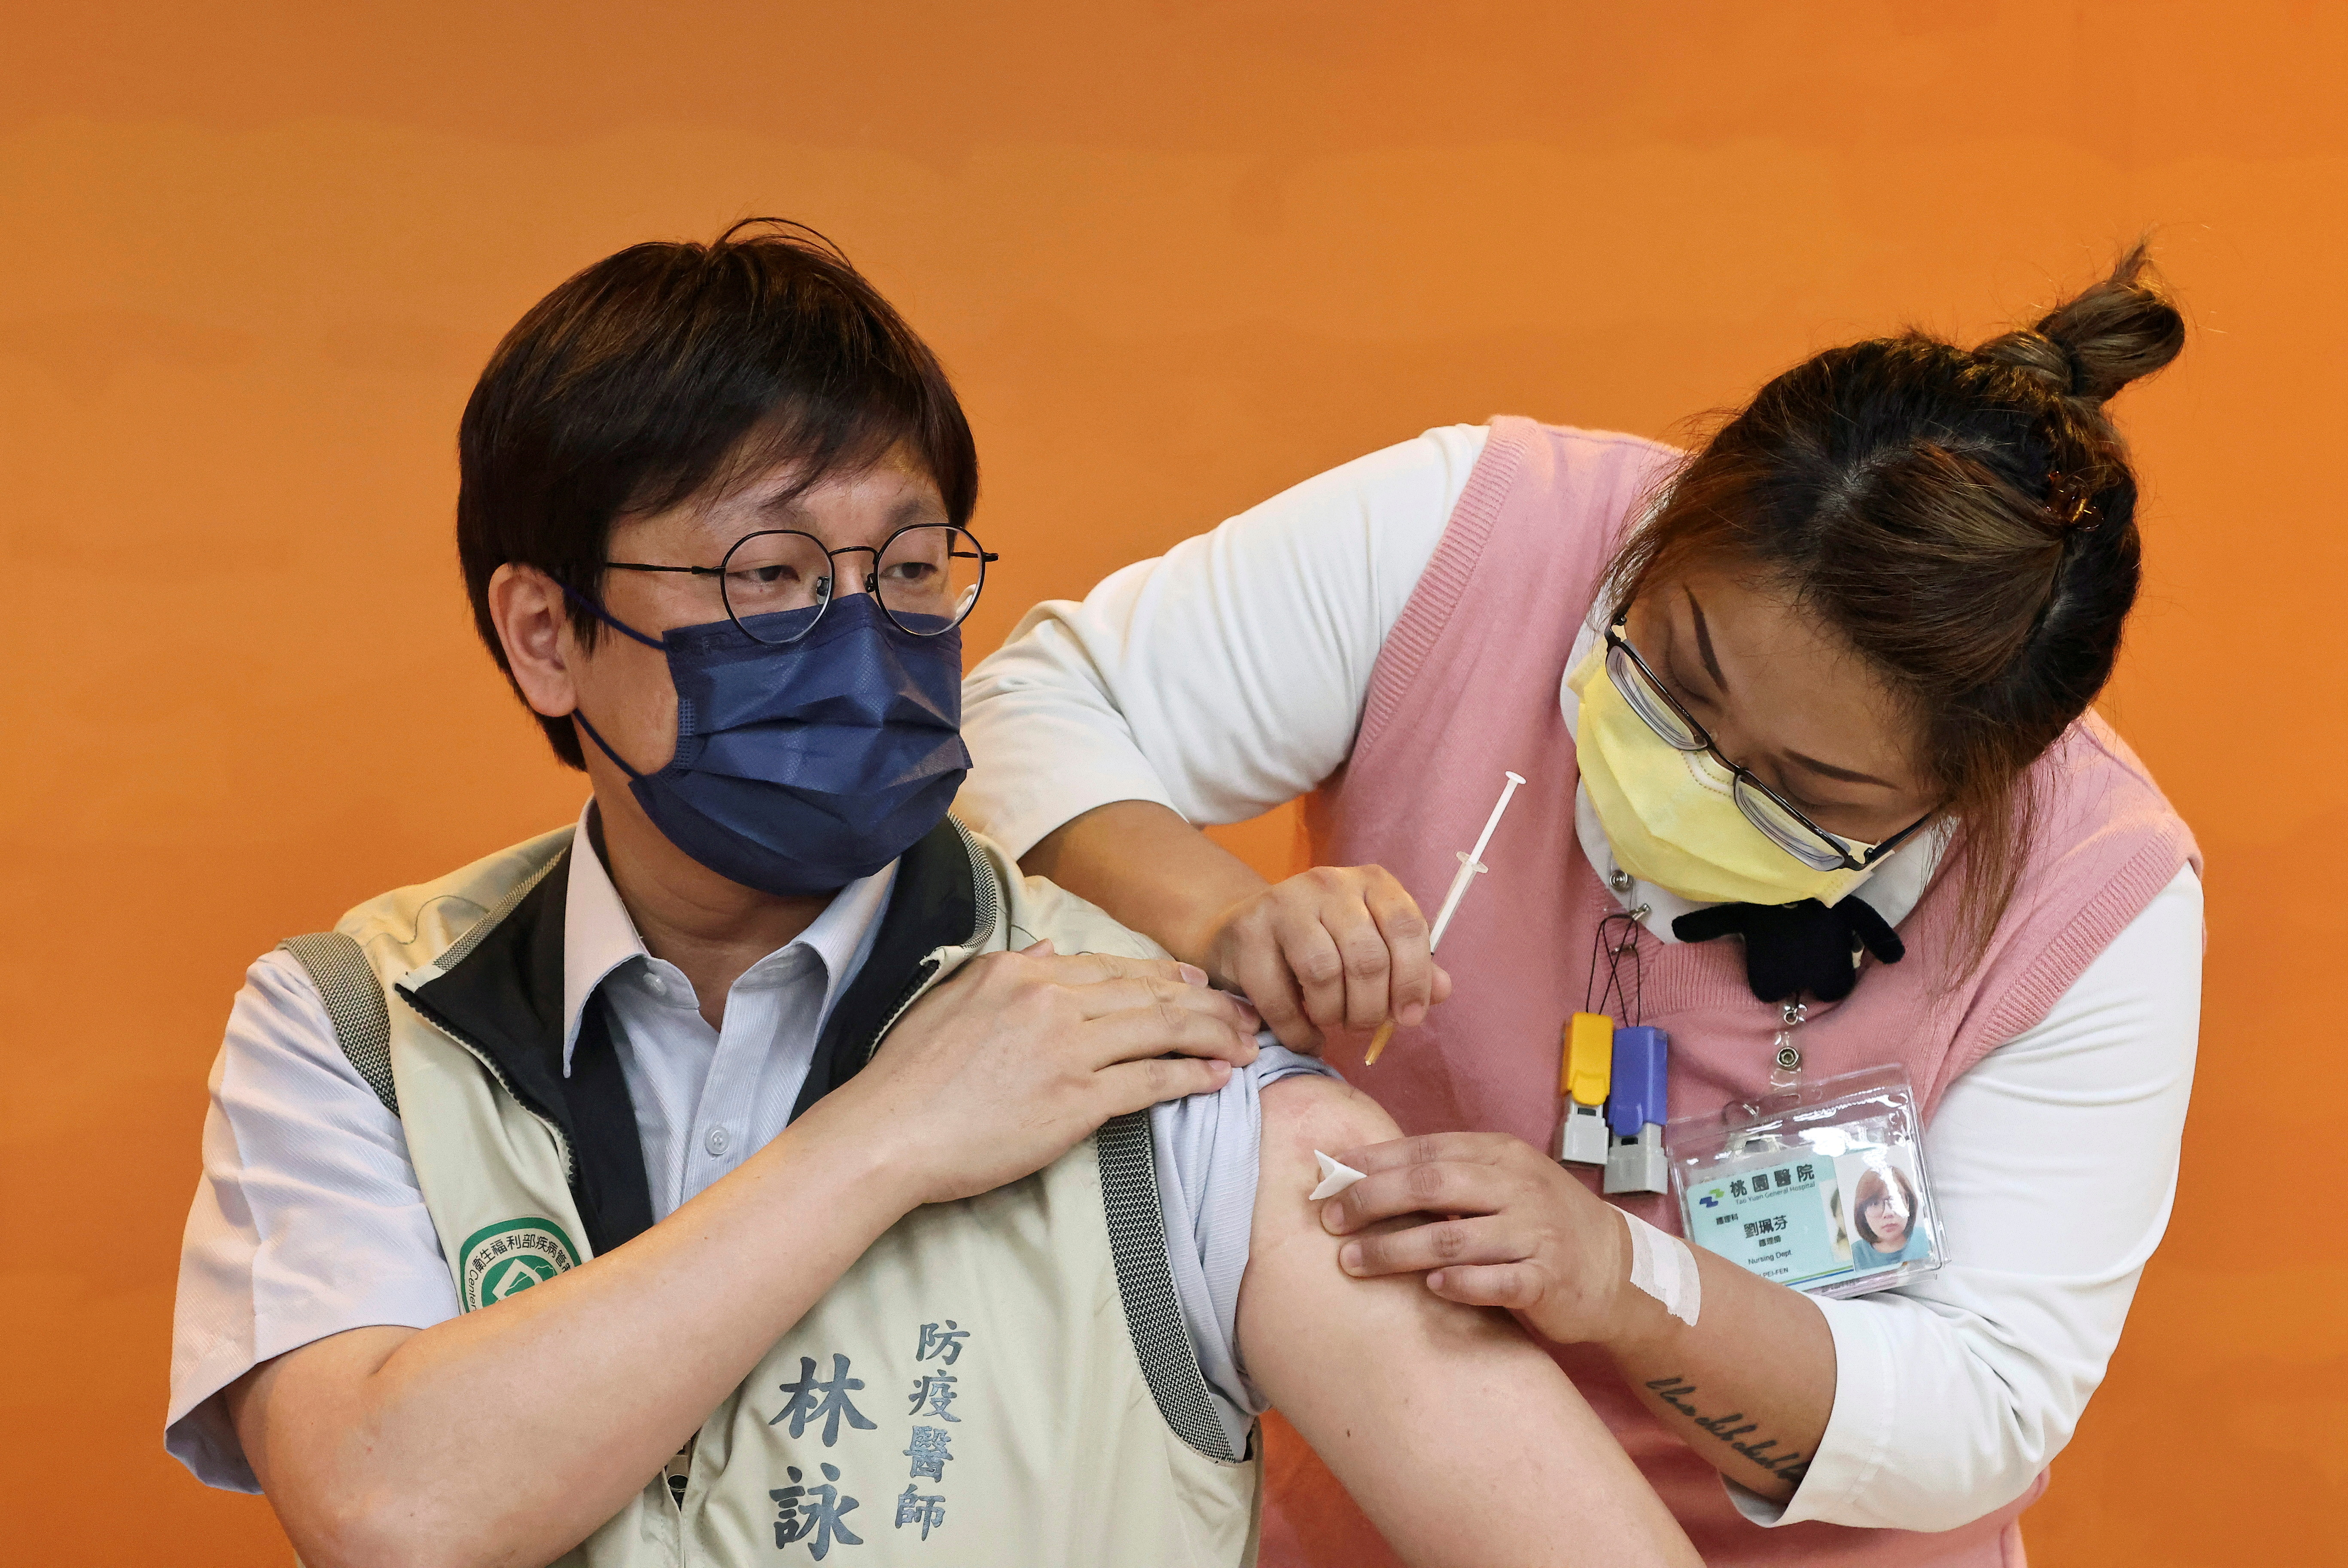 A doctor receives a dose of the AstraZeneca vaccine against the coronavirus in Taoyuan, Taiwan